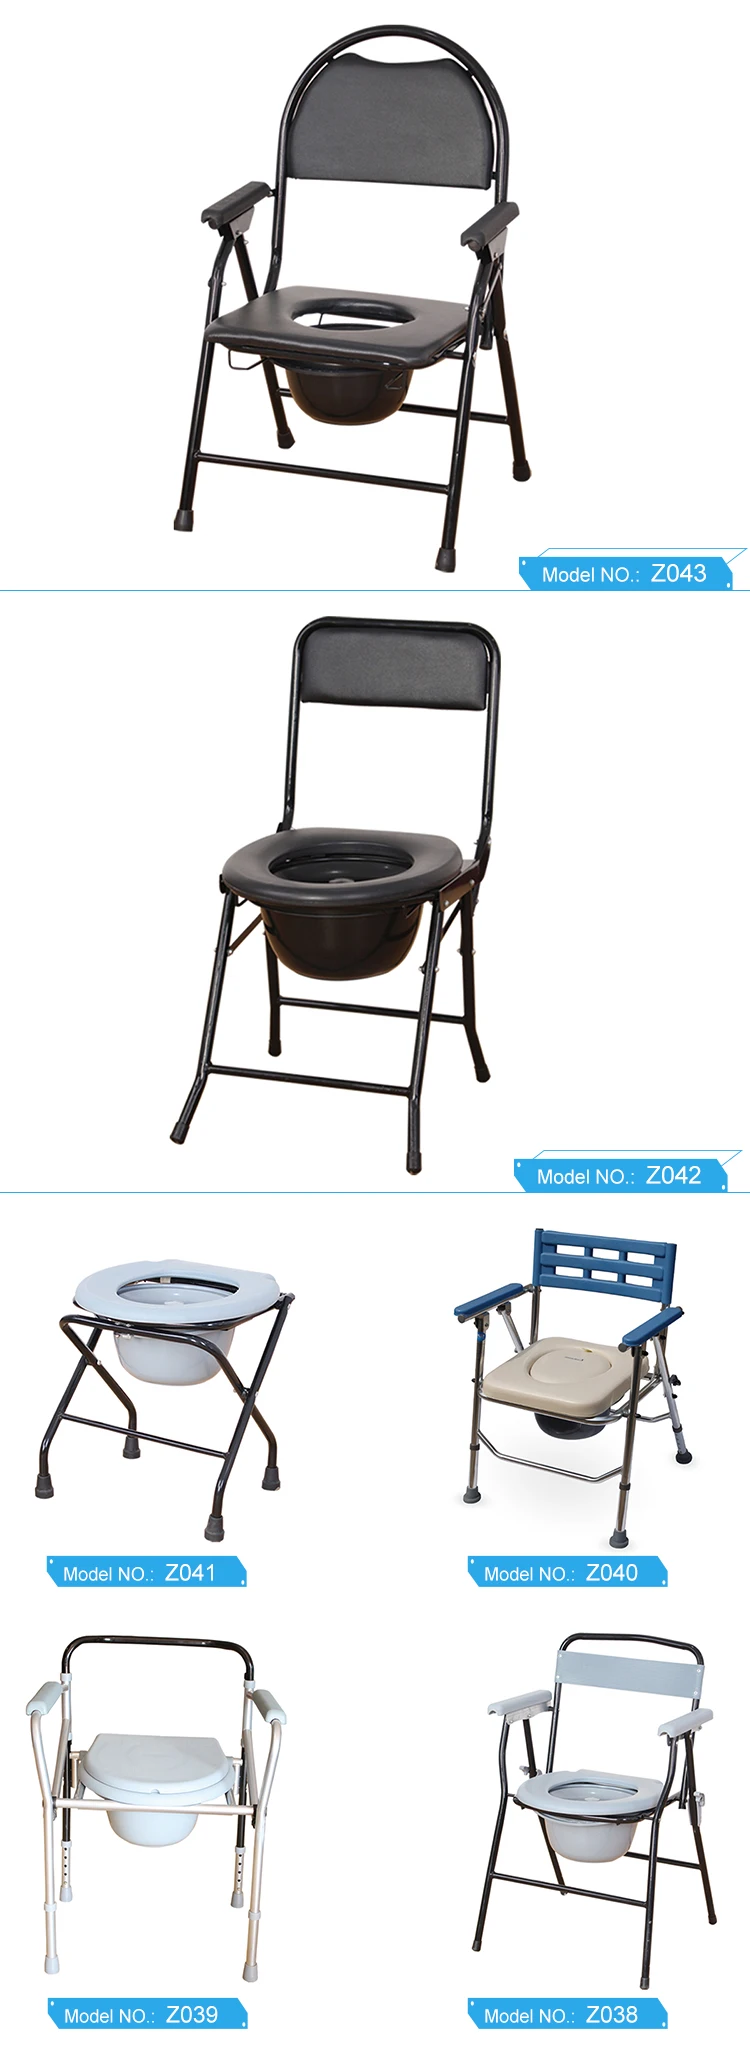 Best Price Toilet Commode Chair With Cheap - Buy Toilet Commode Chair